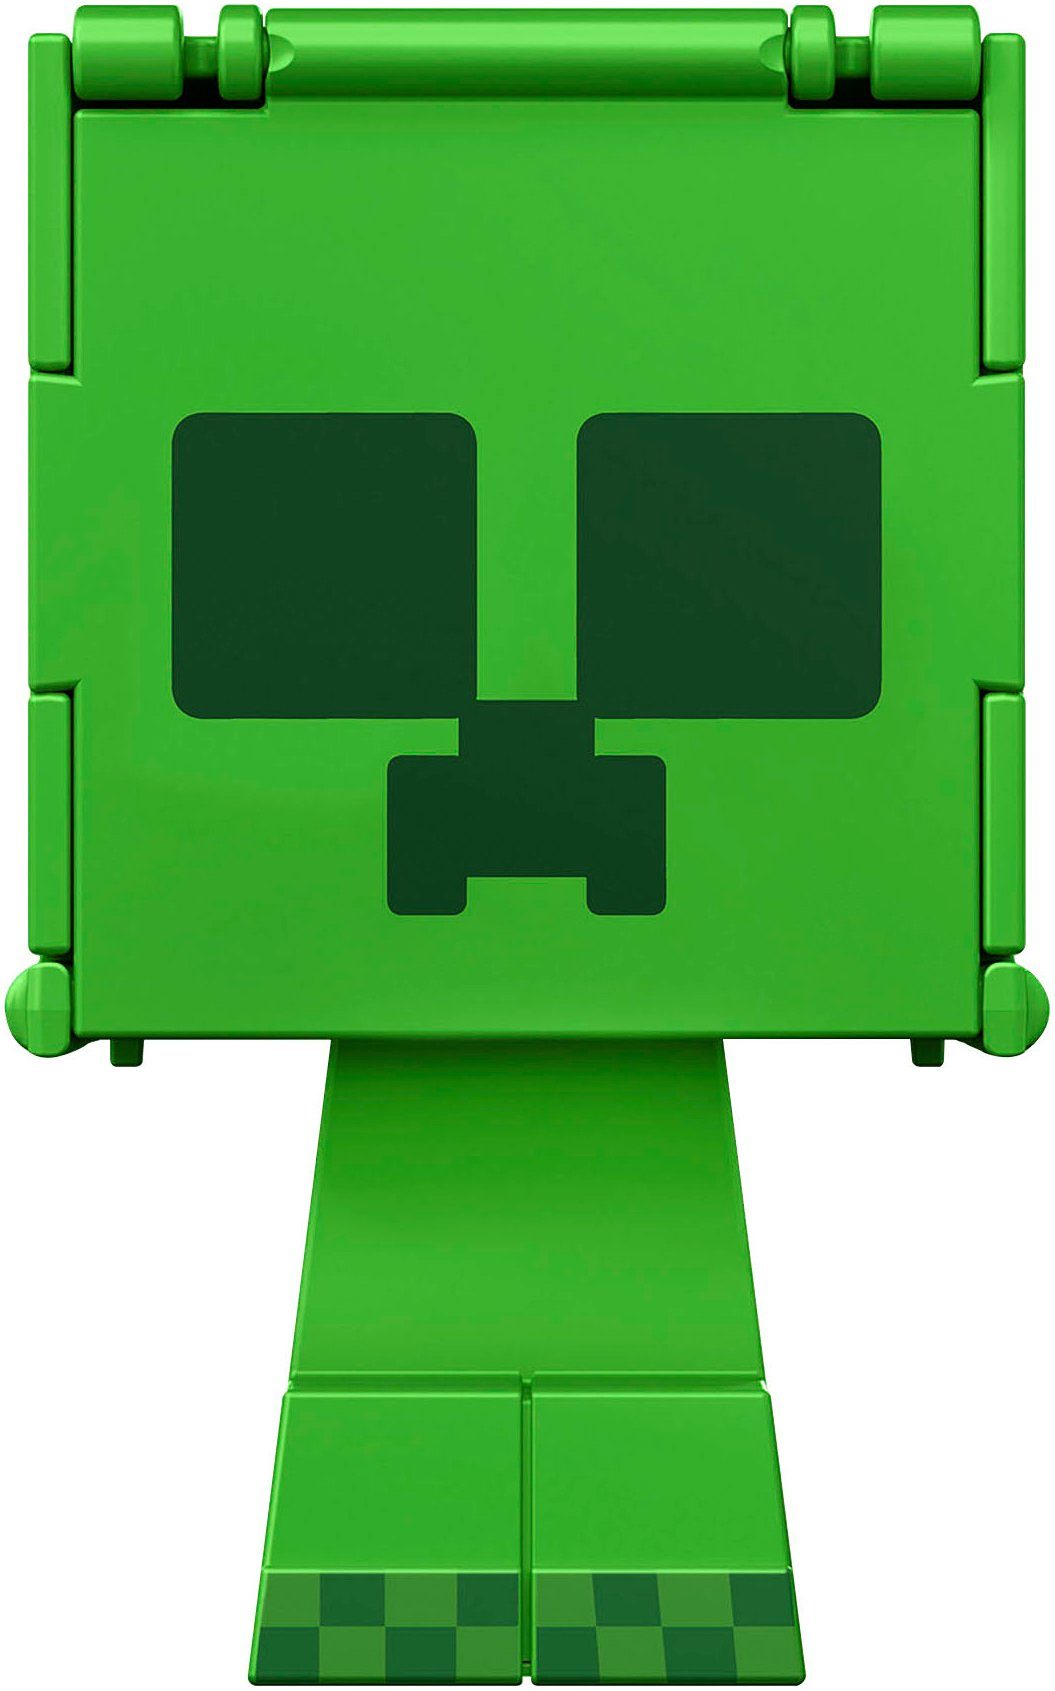 Mattel® Actionfigur Minecraft, Flippin' Figs, 2in1 - Creeper + Charged Creeper